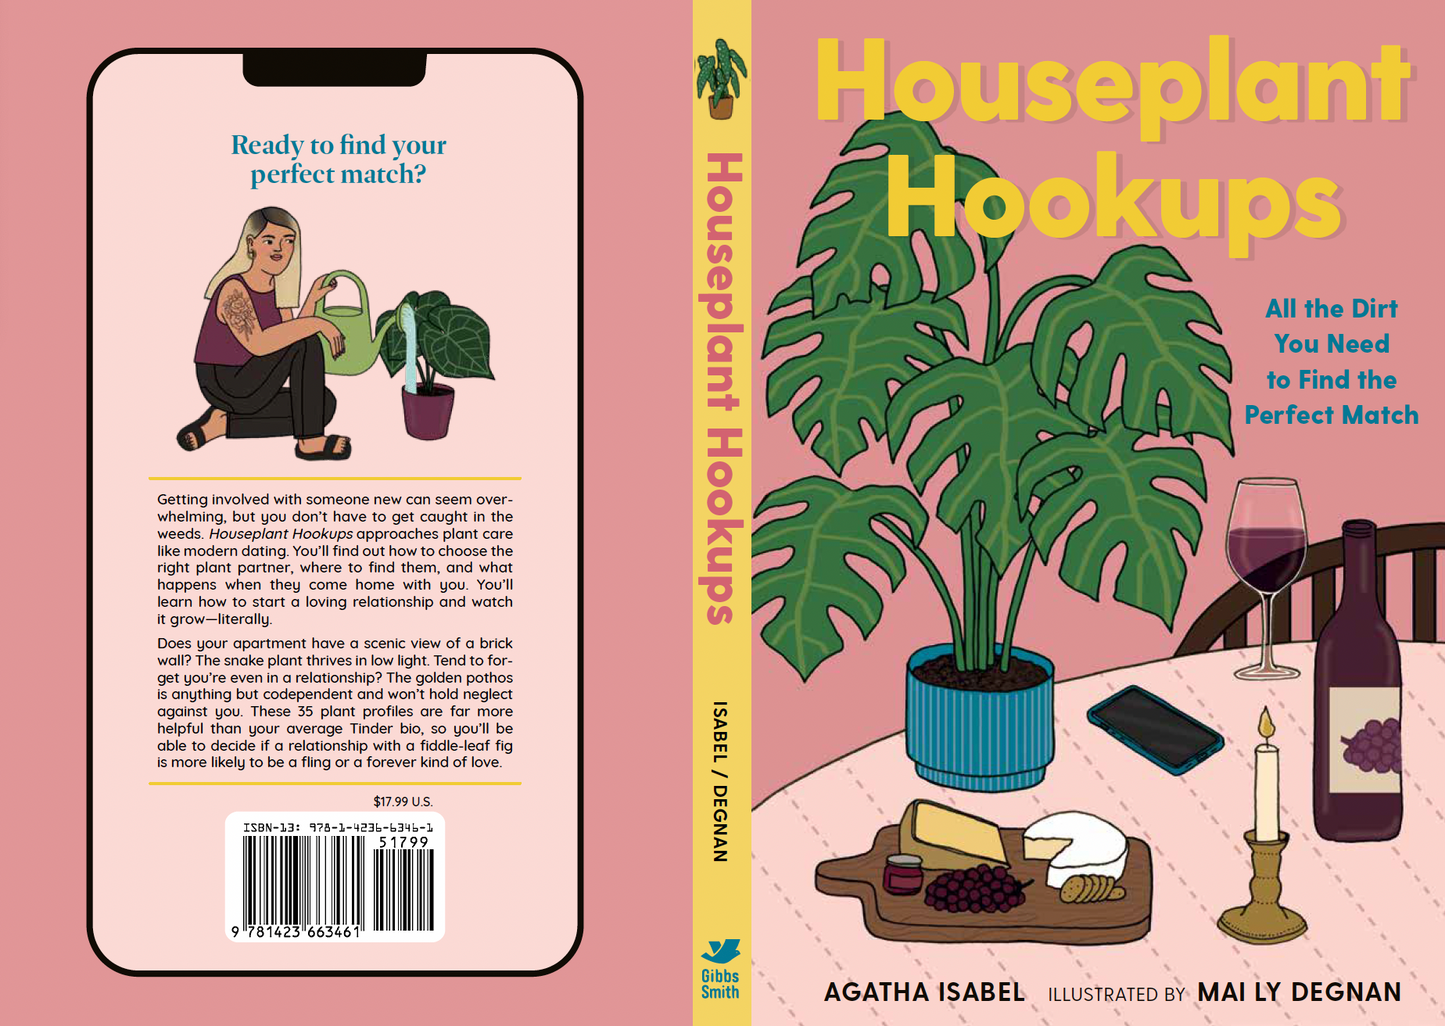 Houseplant Hookups (SIGNED with handmade bookmark by Agatha)